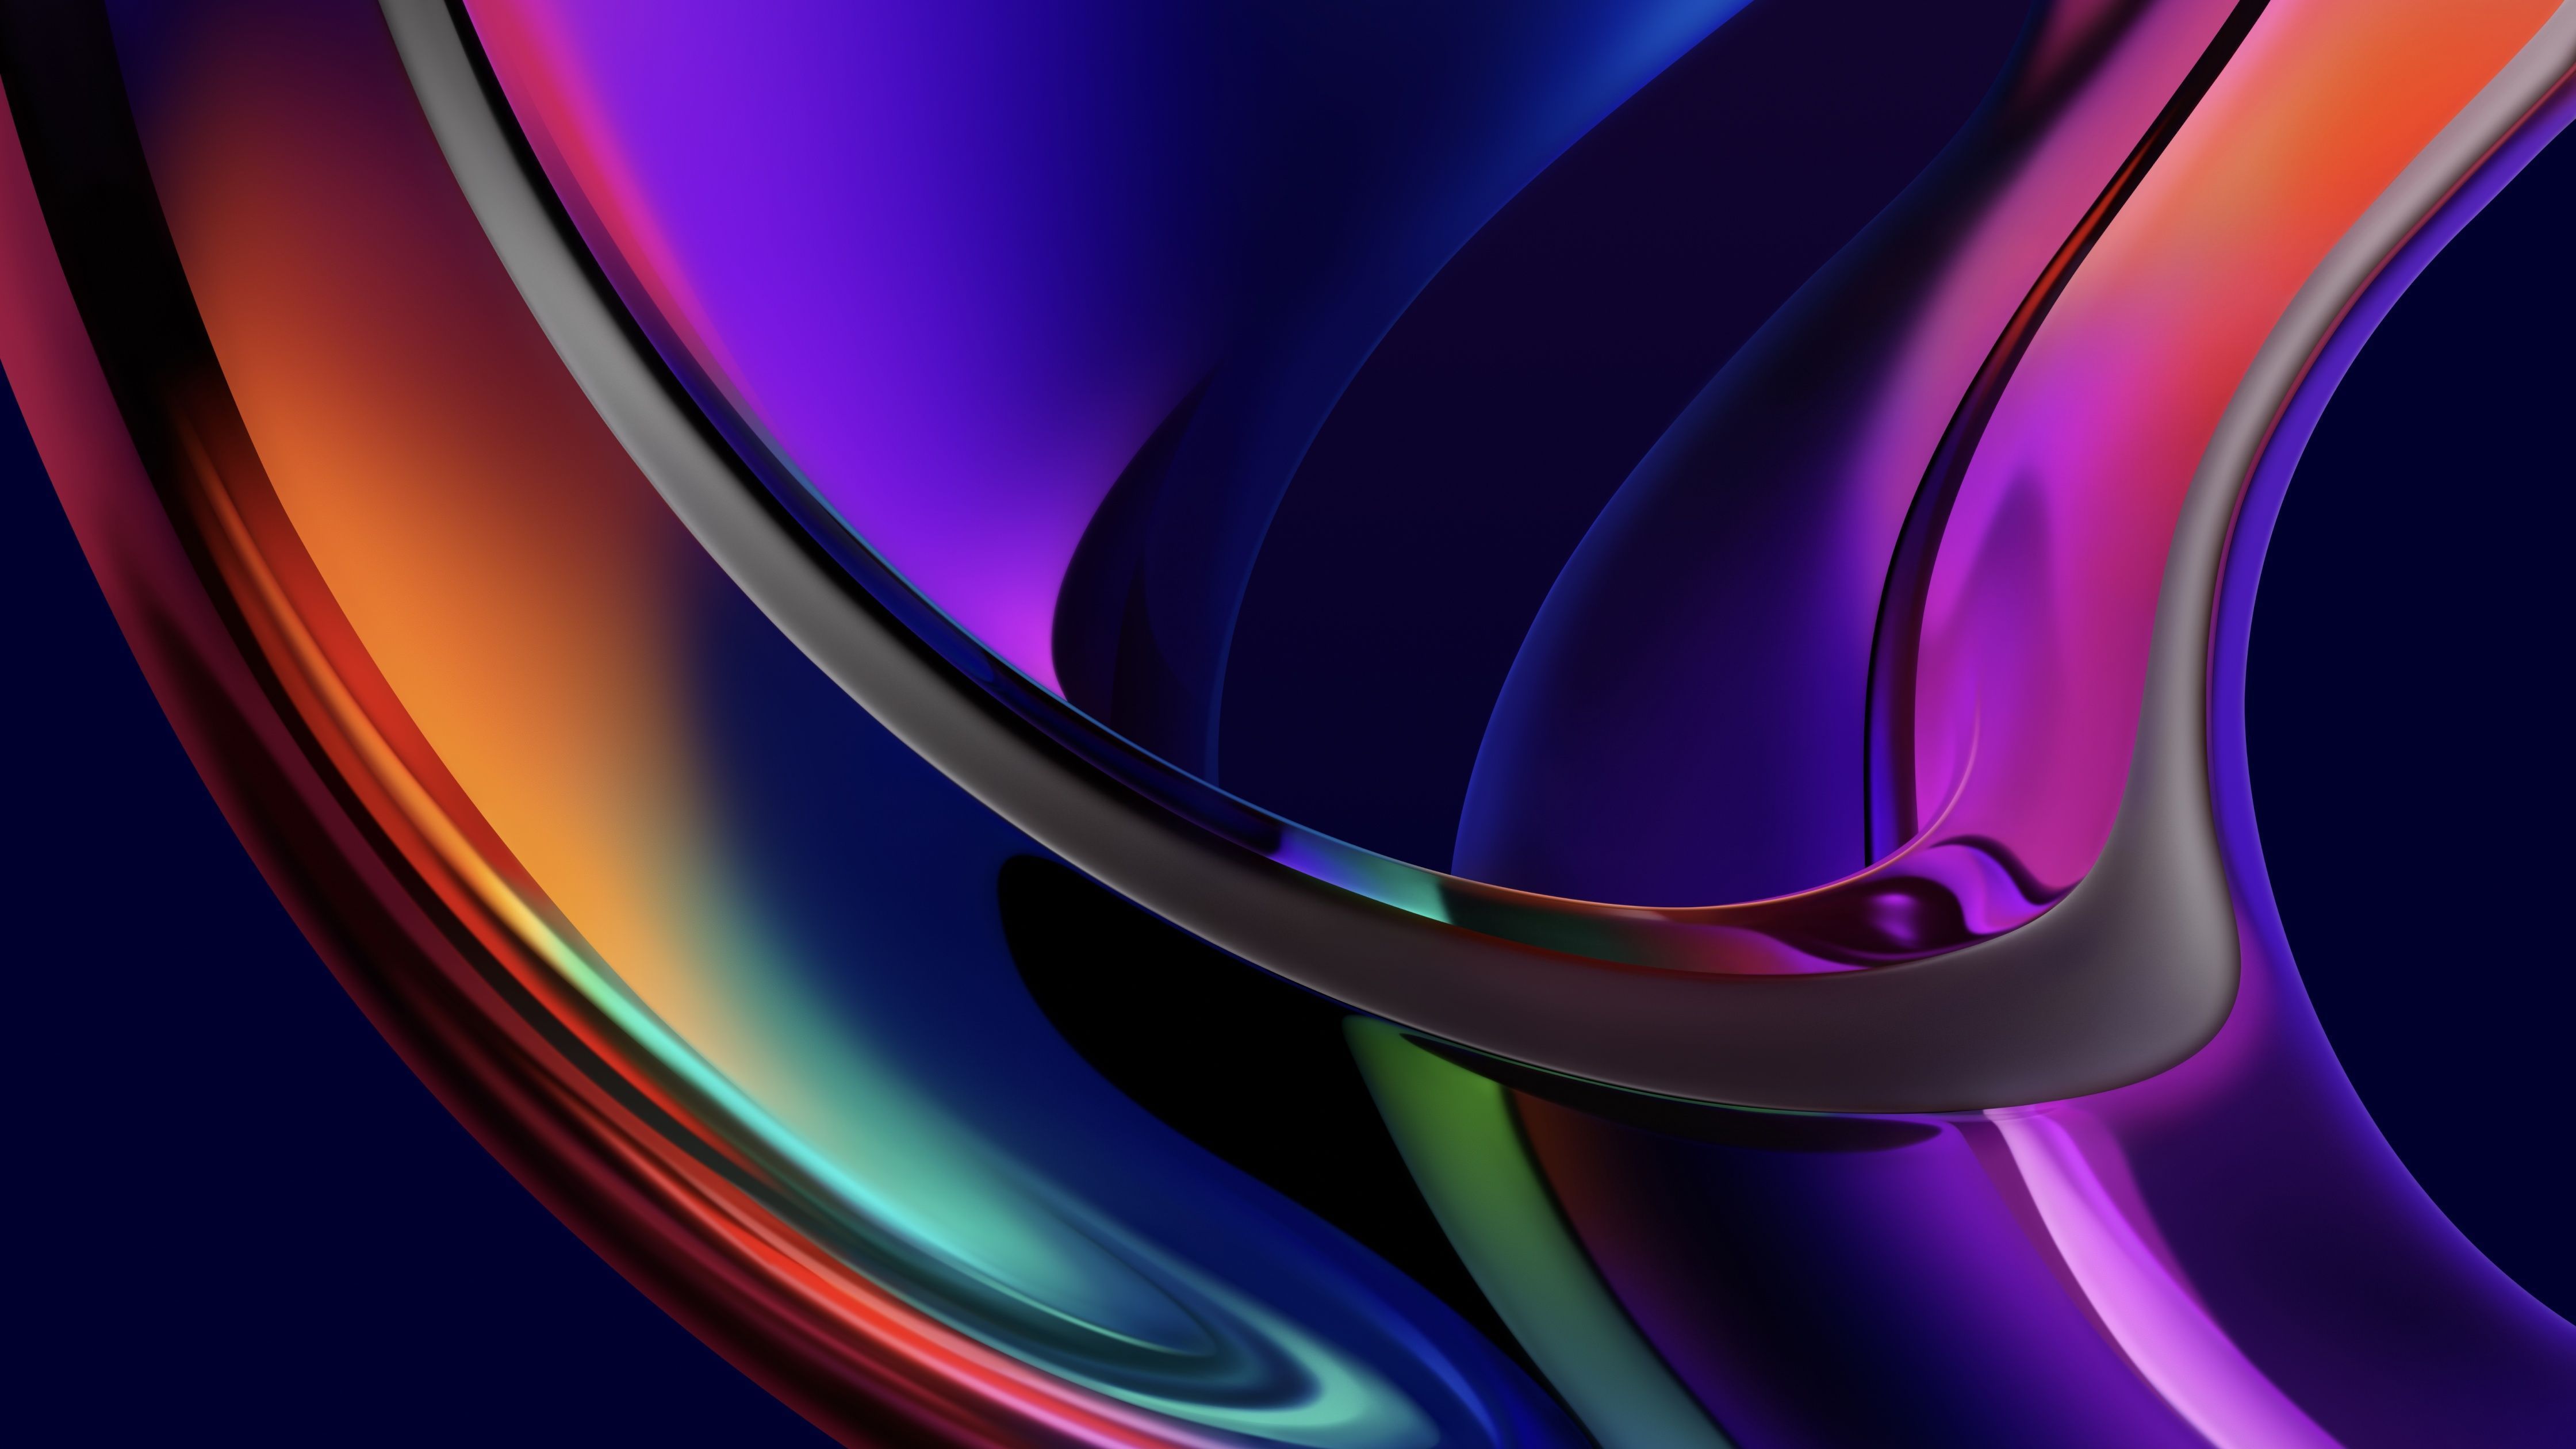 A colorful abstract background image of a wave - Iridescent